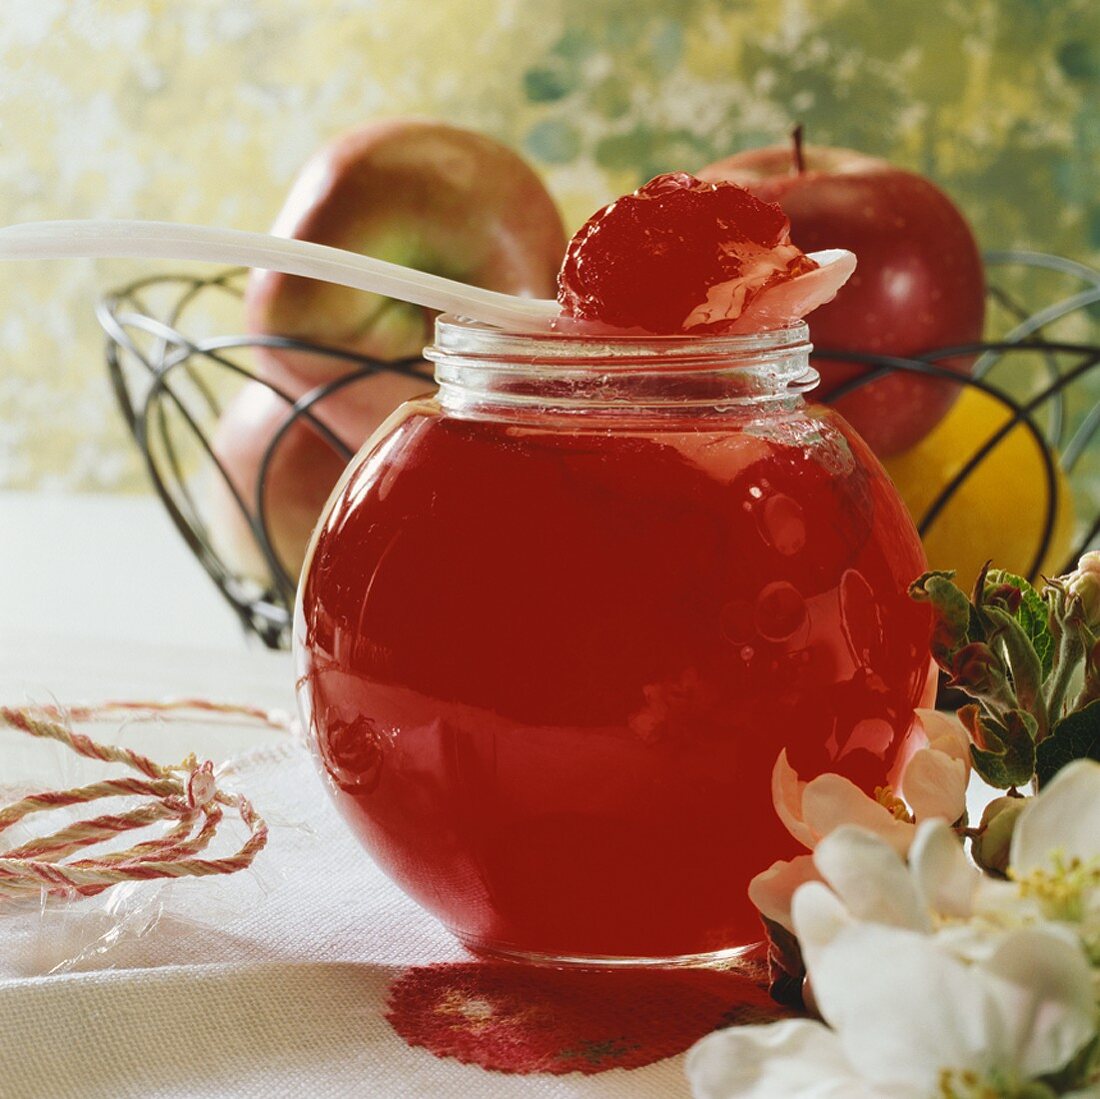 Apple and redcurrant jelly